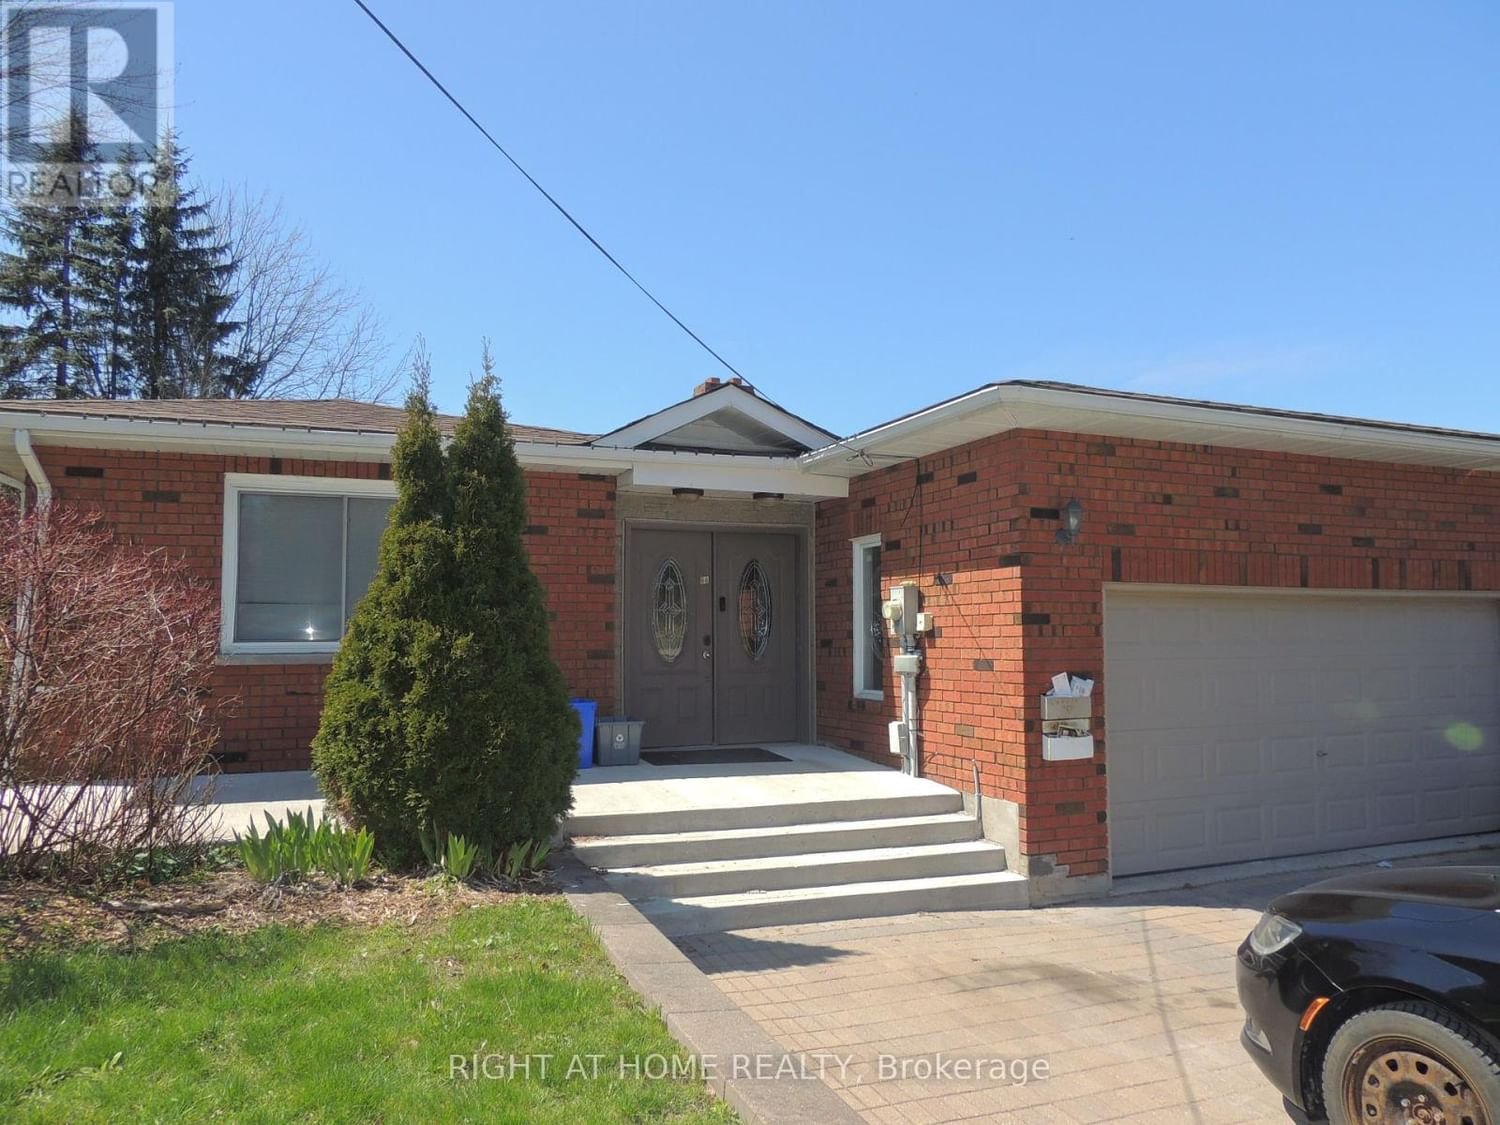 66 BAYVIEW DR Image 1